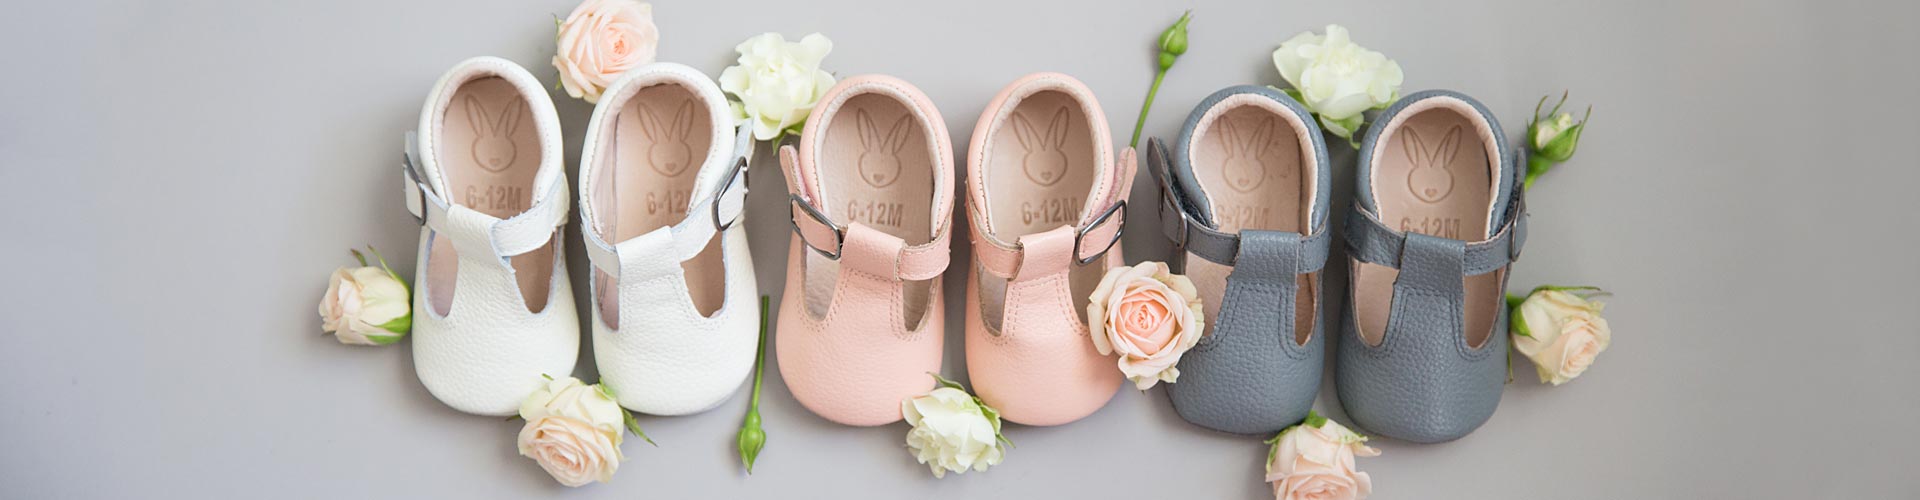 Aston baby shoes - mary jane shoes for toddlers and babies